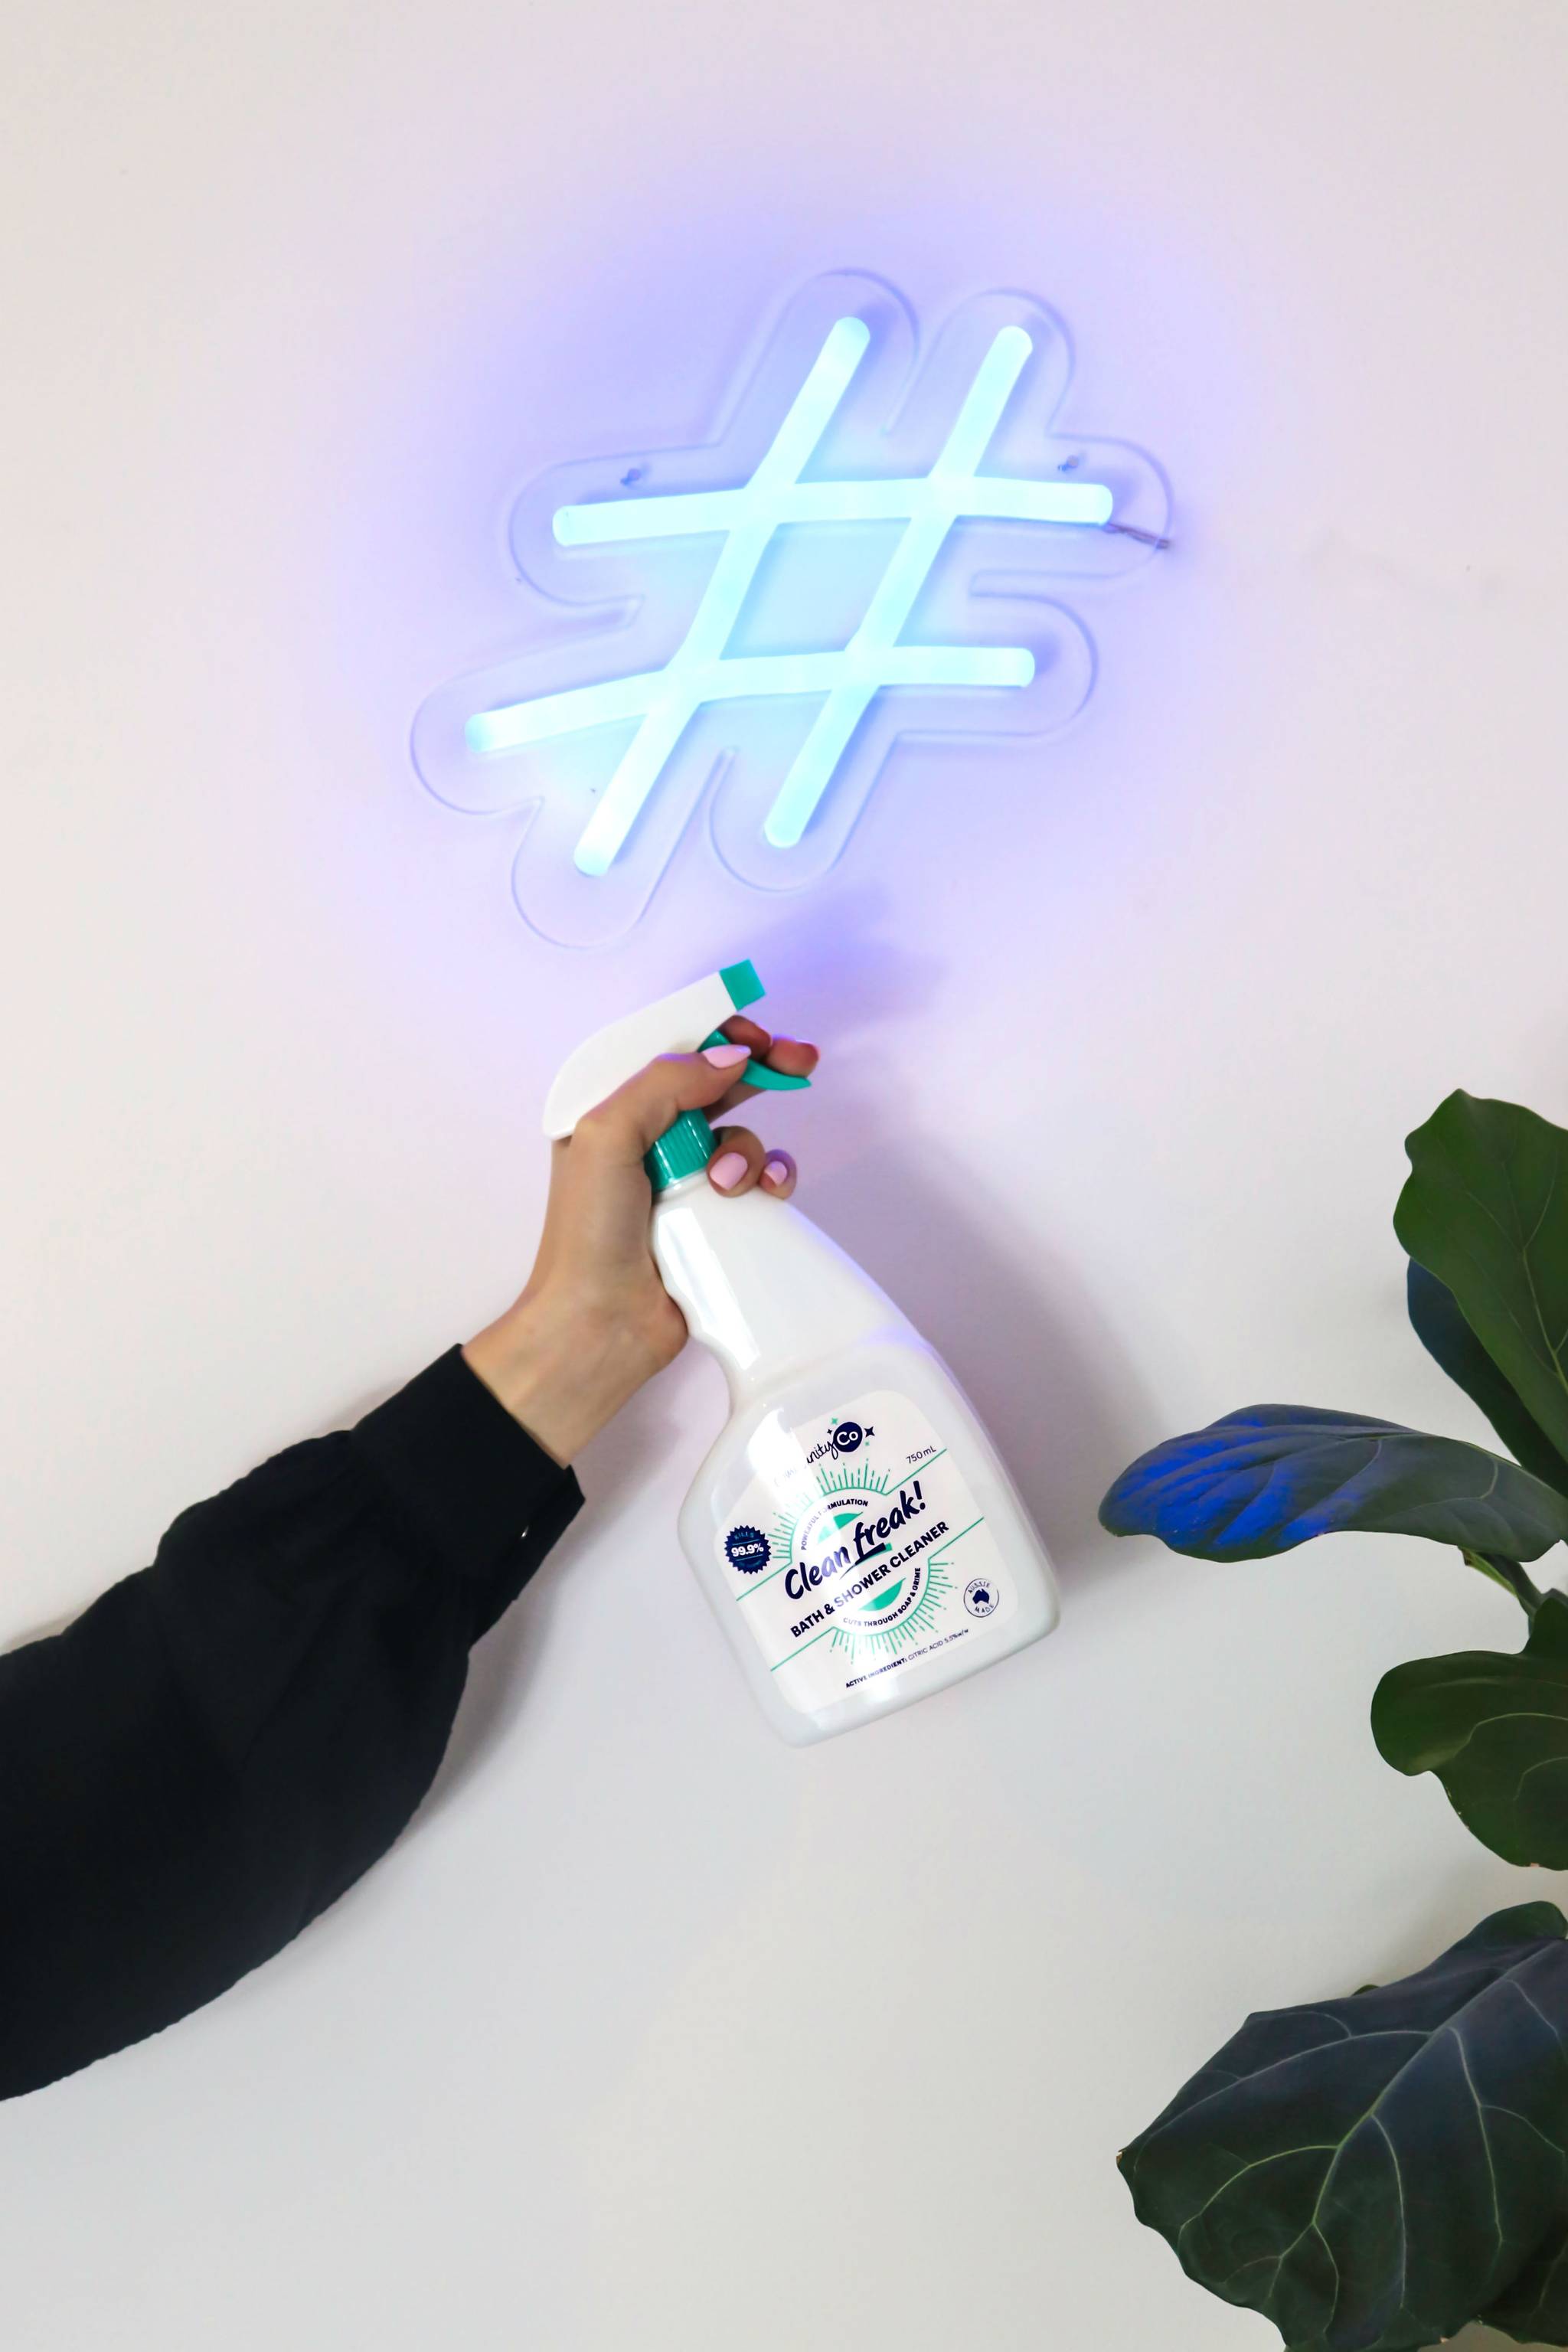 Home hackers: DIY cleaners finding inspiration online